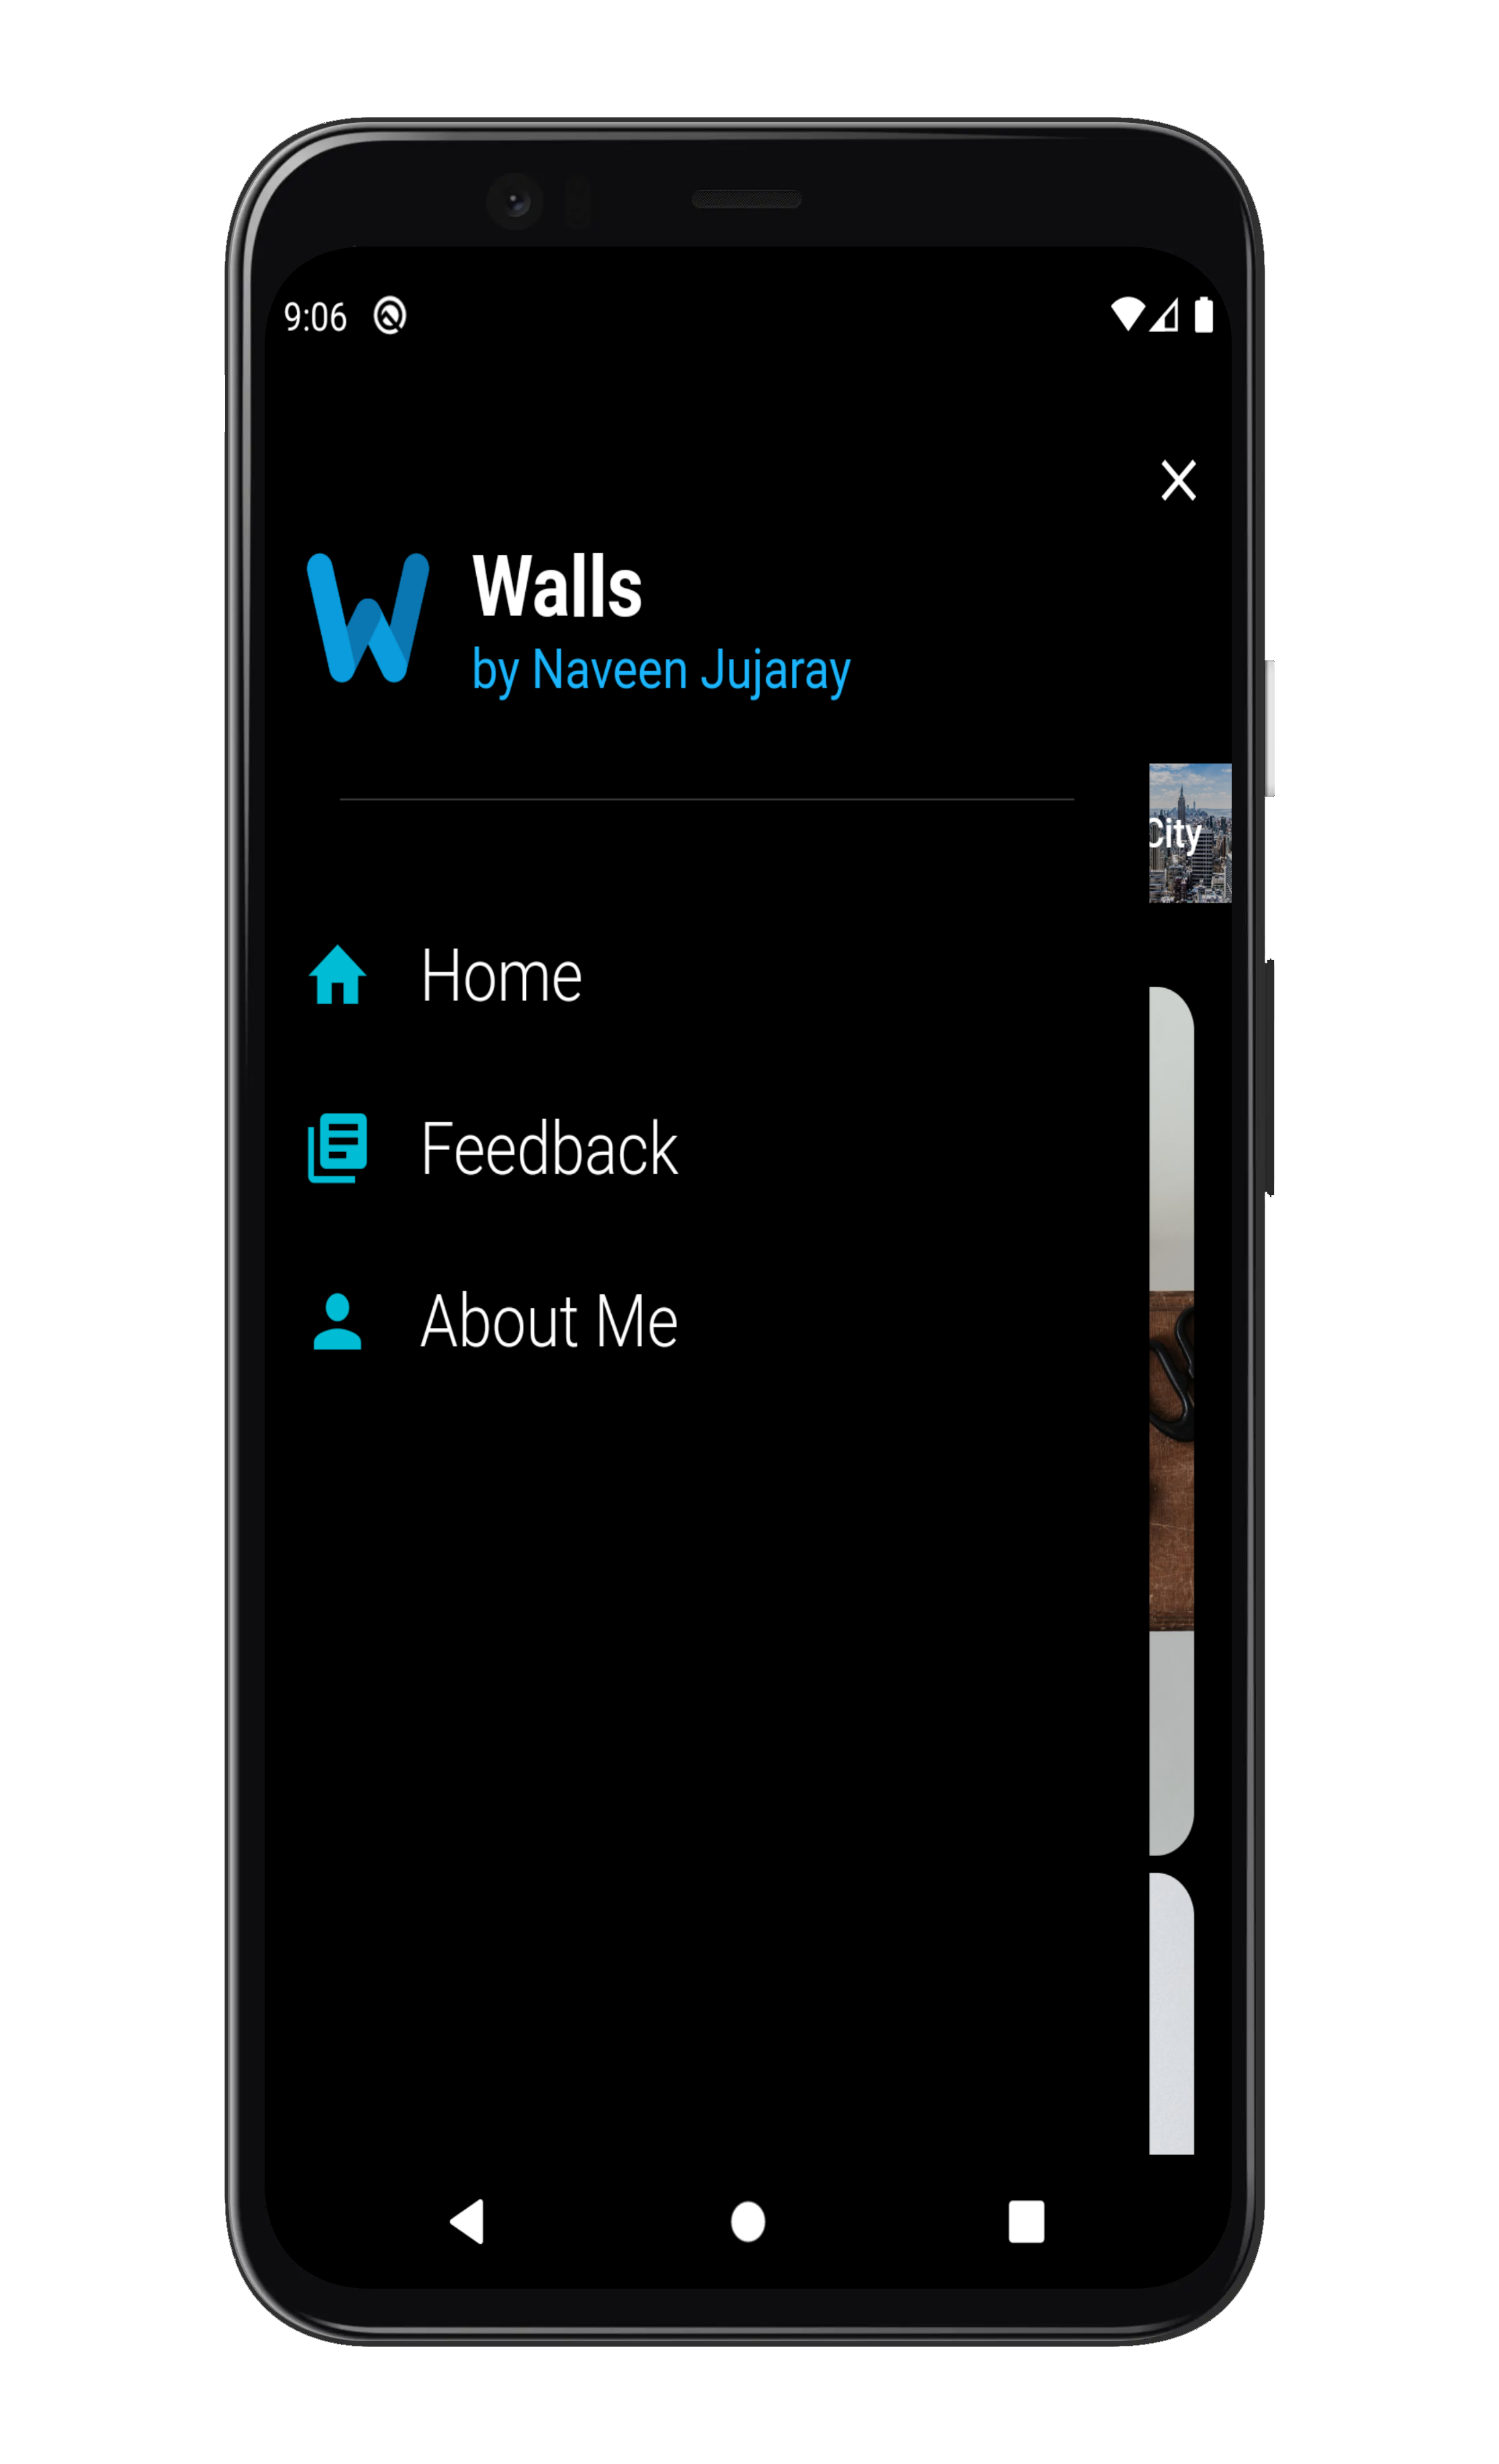 Walls - A wallpaper service app with out any Ads, Built using Flutter